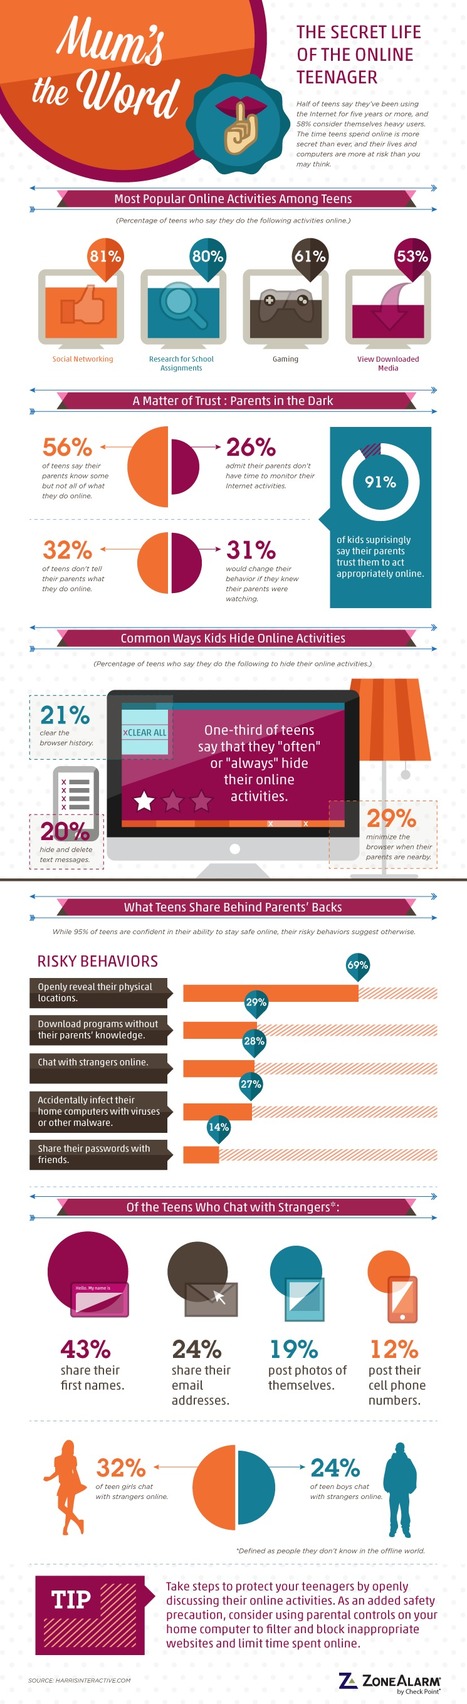 The Secret Online Life Of Teenagers [Infographic] | Social Media and its influence | Scoop.it